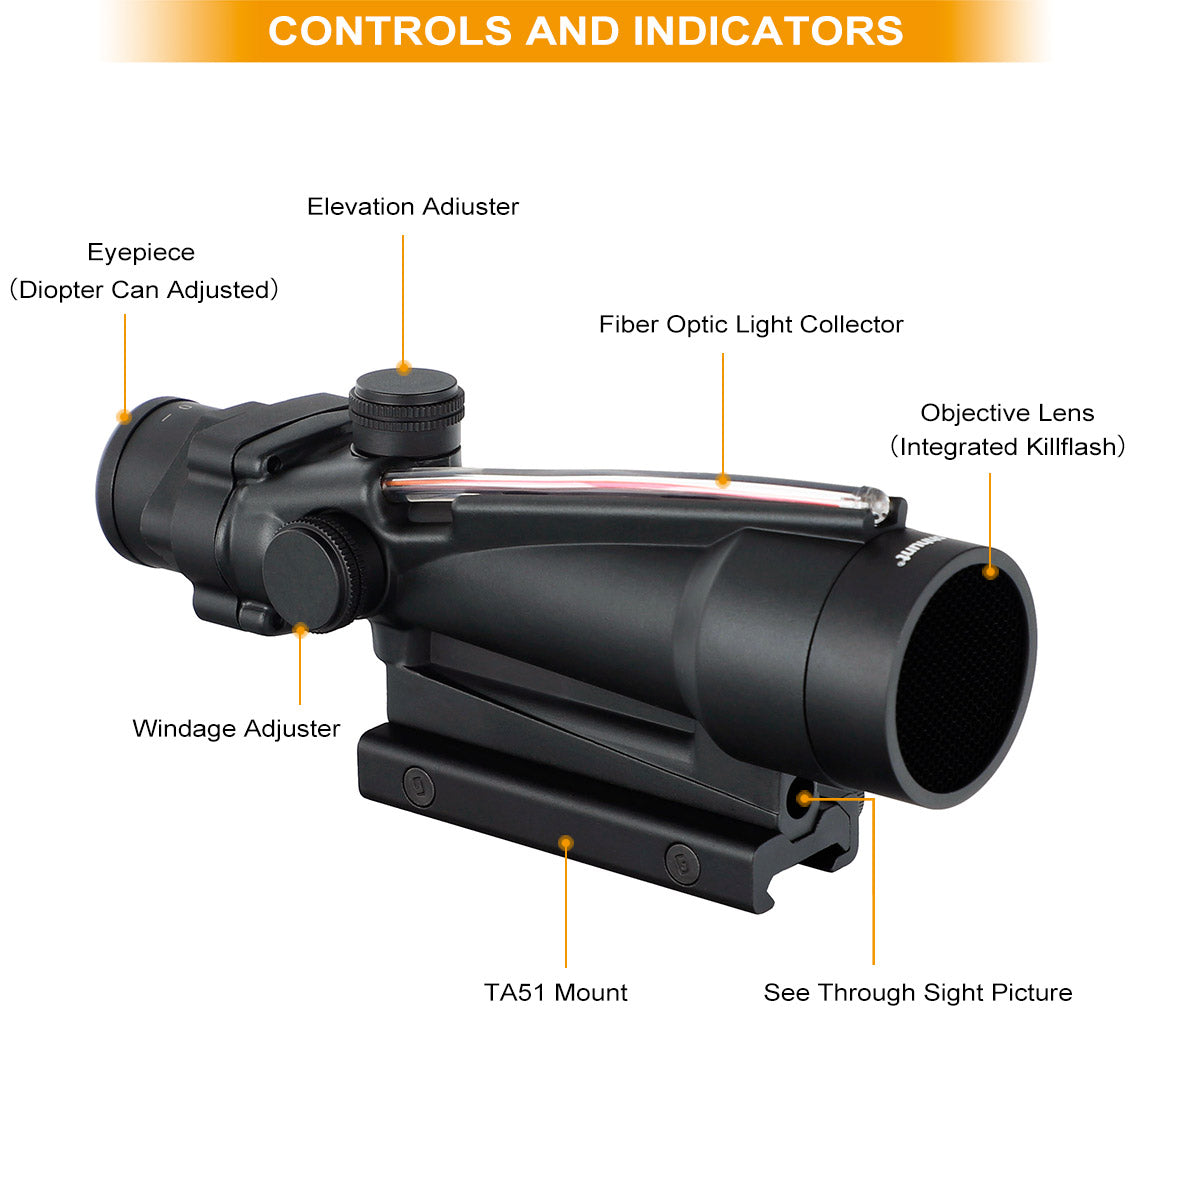 ohhunt® Tactical 3.5X35 Rifle Scope Red/Green Fiber Optic Illuminated Reticle with Sunshades Diopter Adjustment